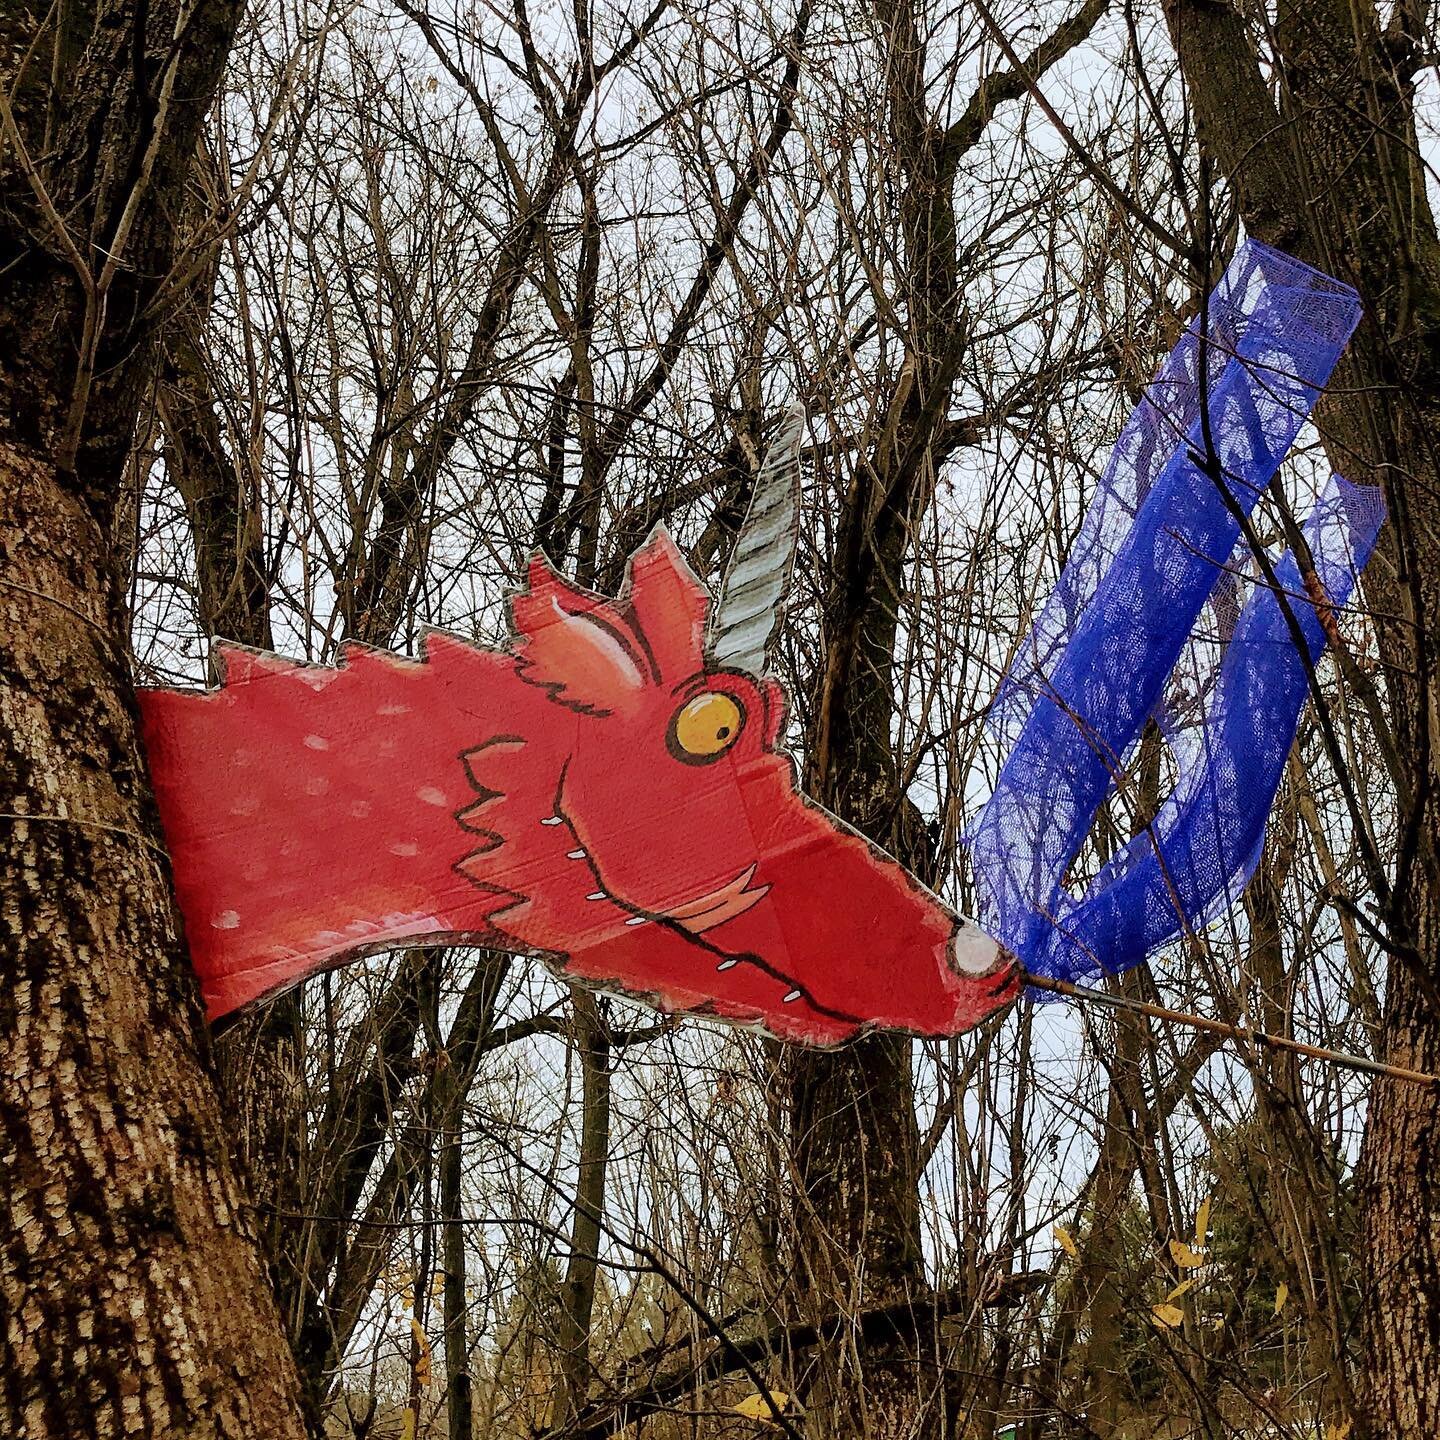 Guess who&rsquo;s lurking on the Riverwalk at Volunteer&rsquo;s Green? Come read and relive the adventure of the childhood favorite &ldquo;Room on the Broom.&rdquo; This story walk was put together by Richmond Free Library, with art by Radiate! Up un